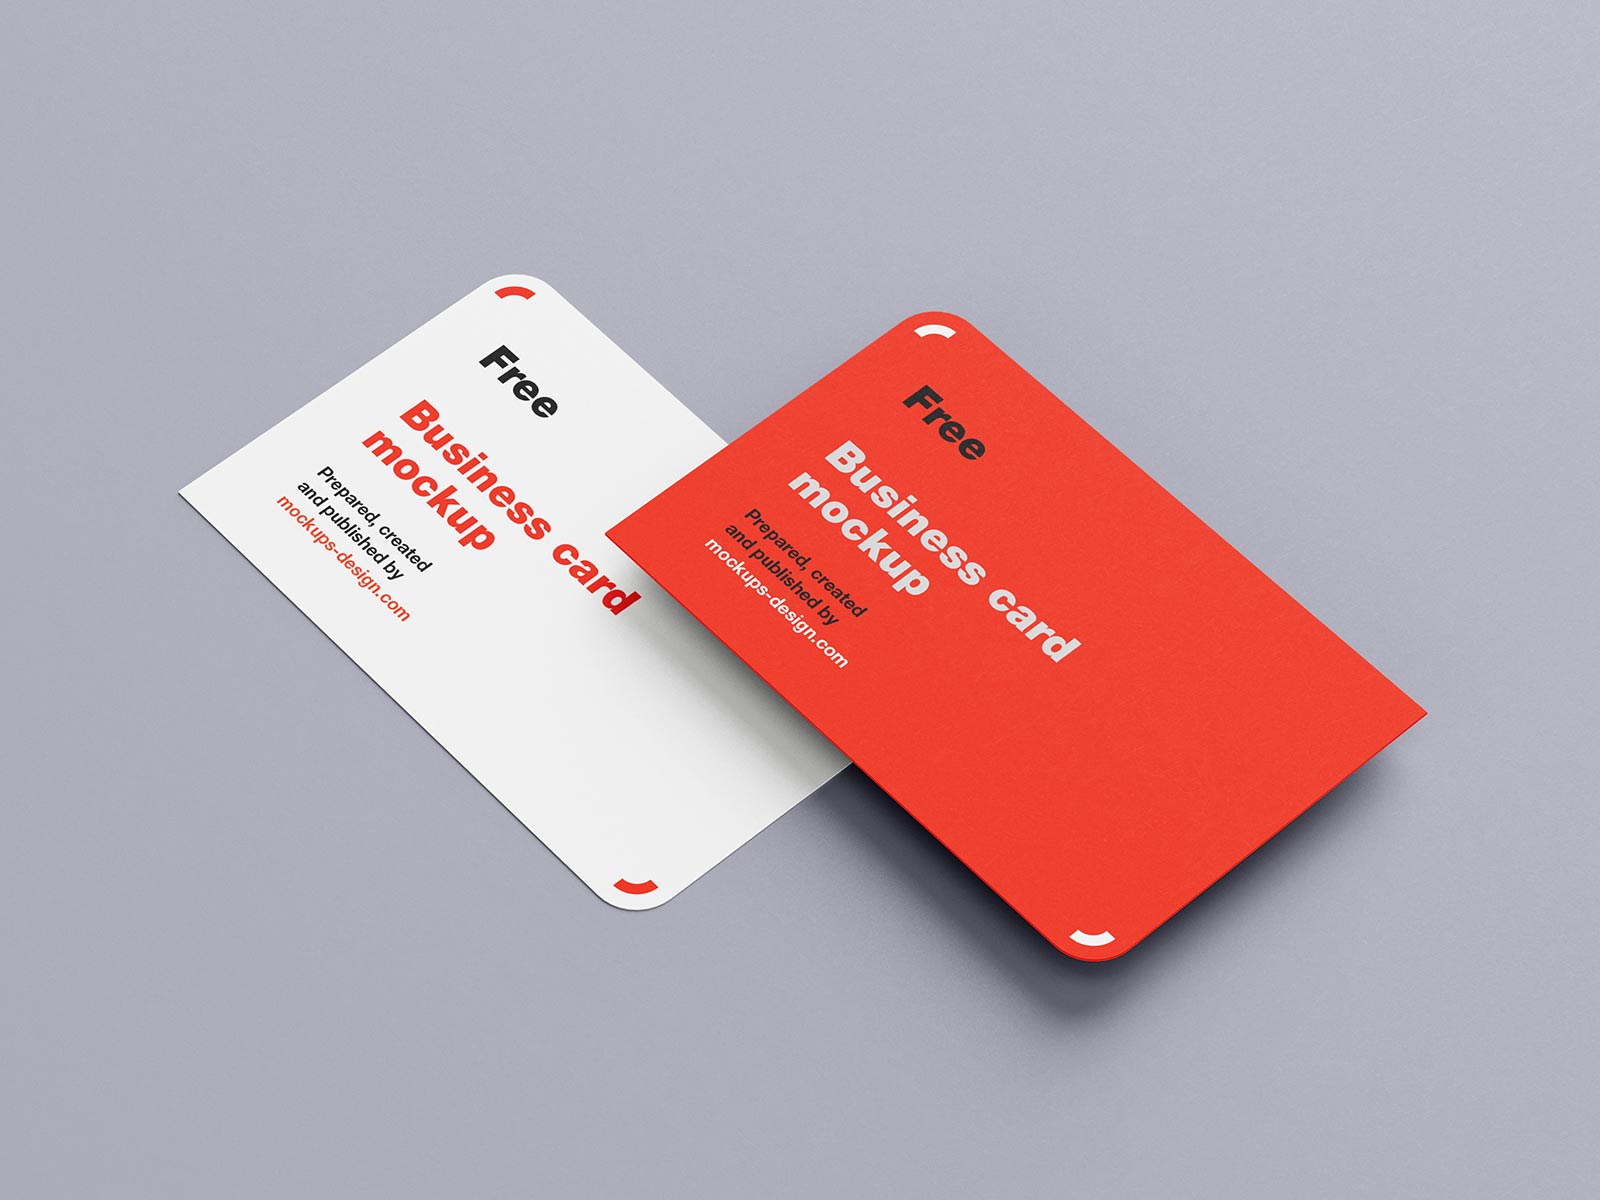 6 Free Rounded Corners Business Card Mockup PSD Files